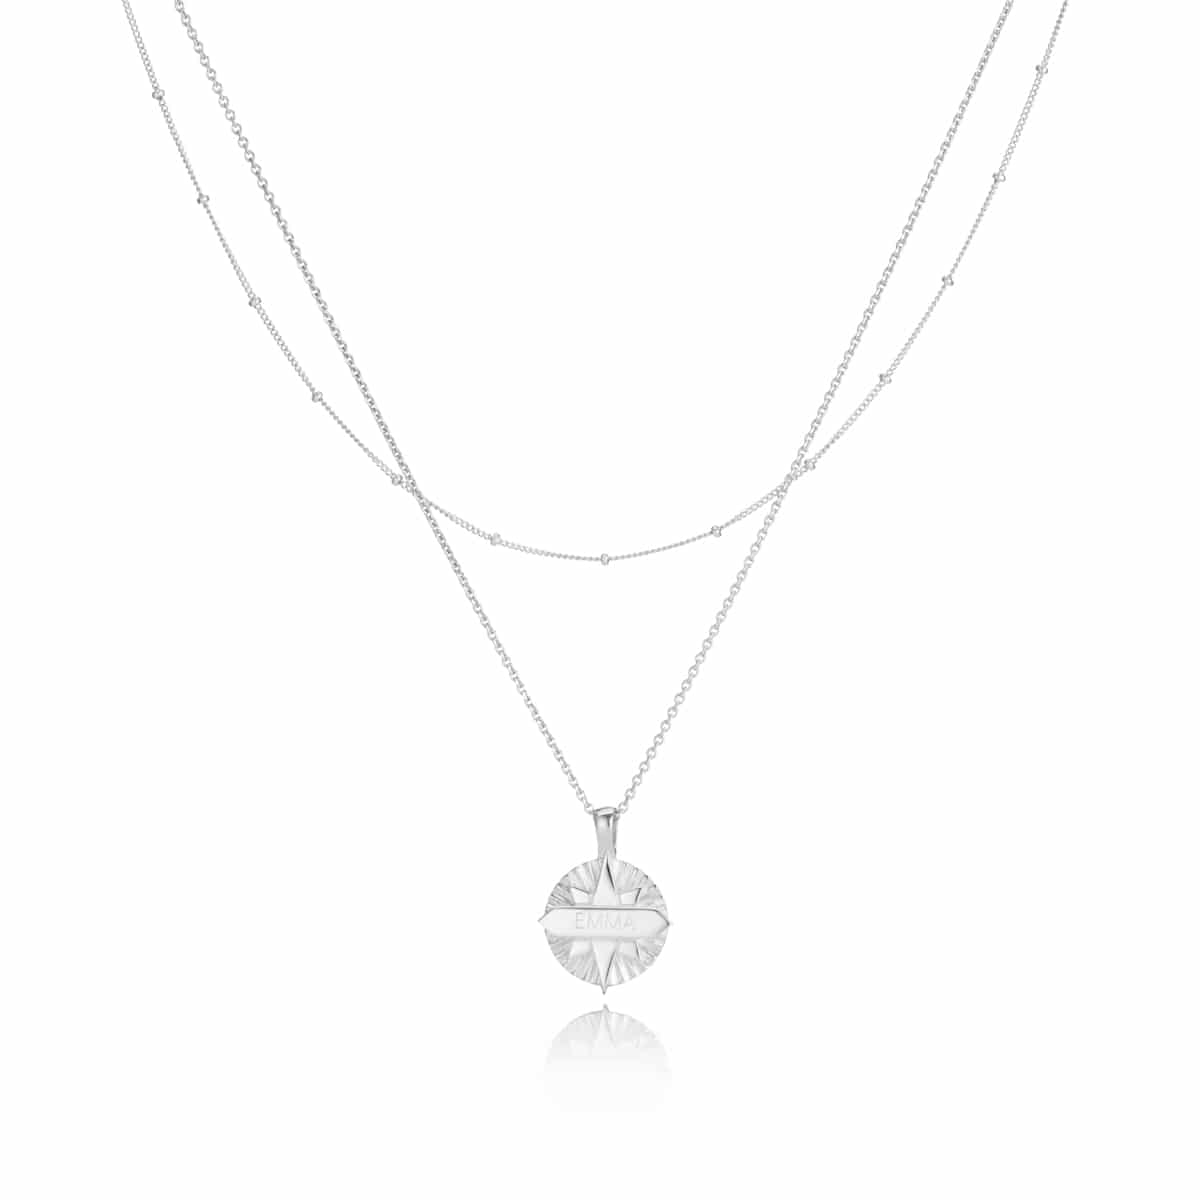 Satalitte and Compass Necklace